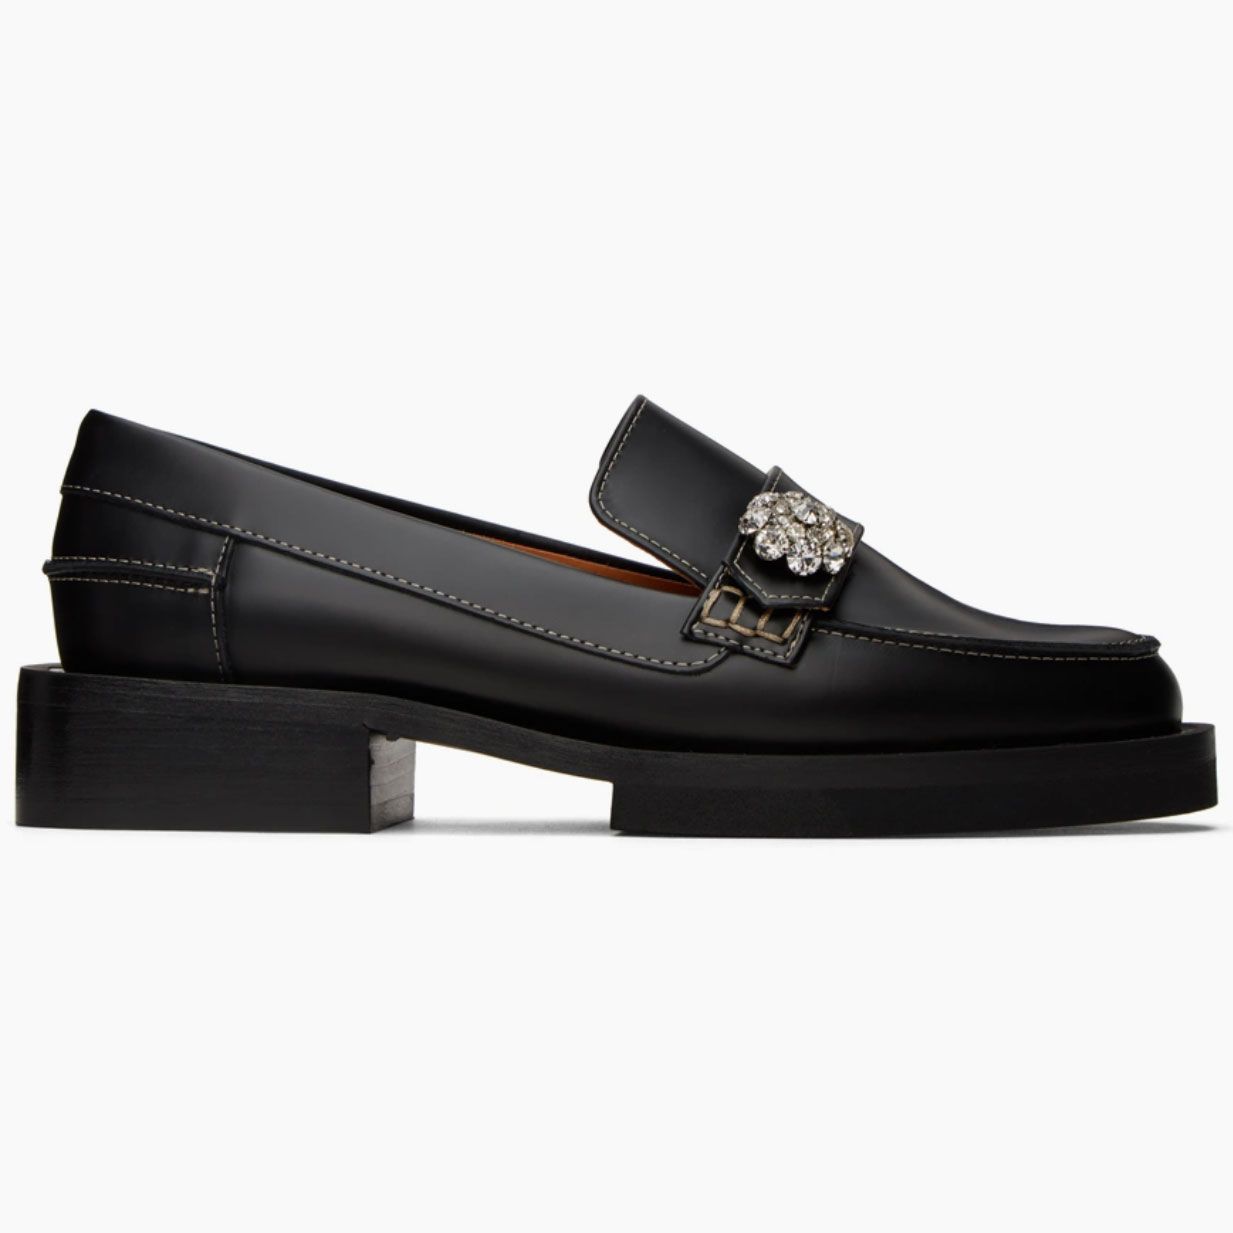 The Best Loafers, According to Cut